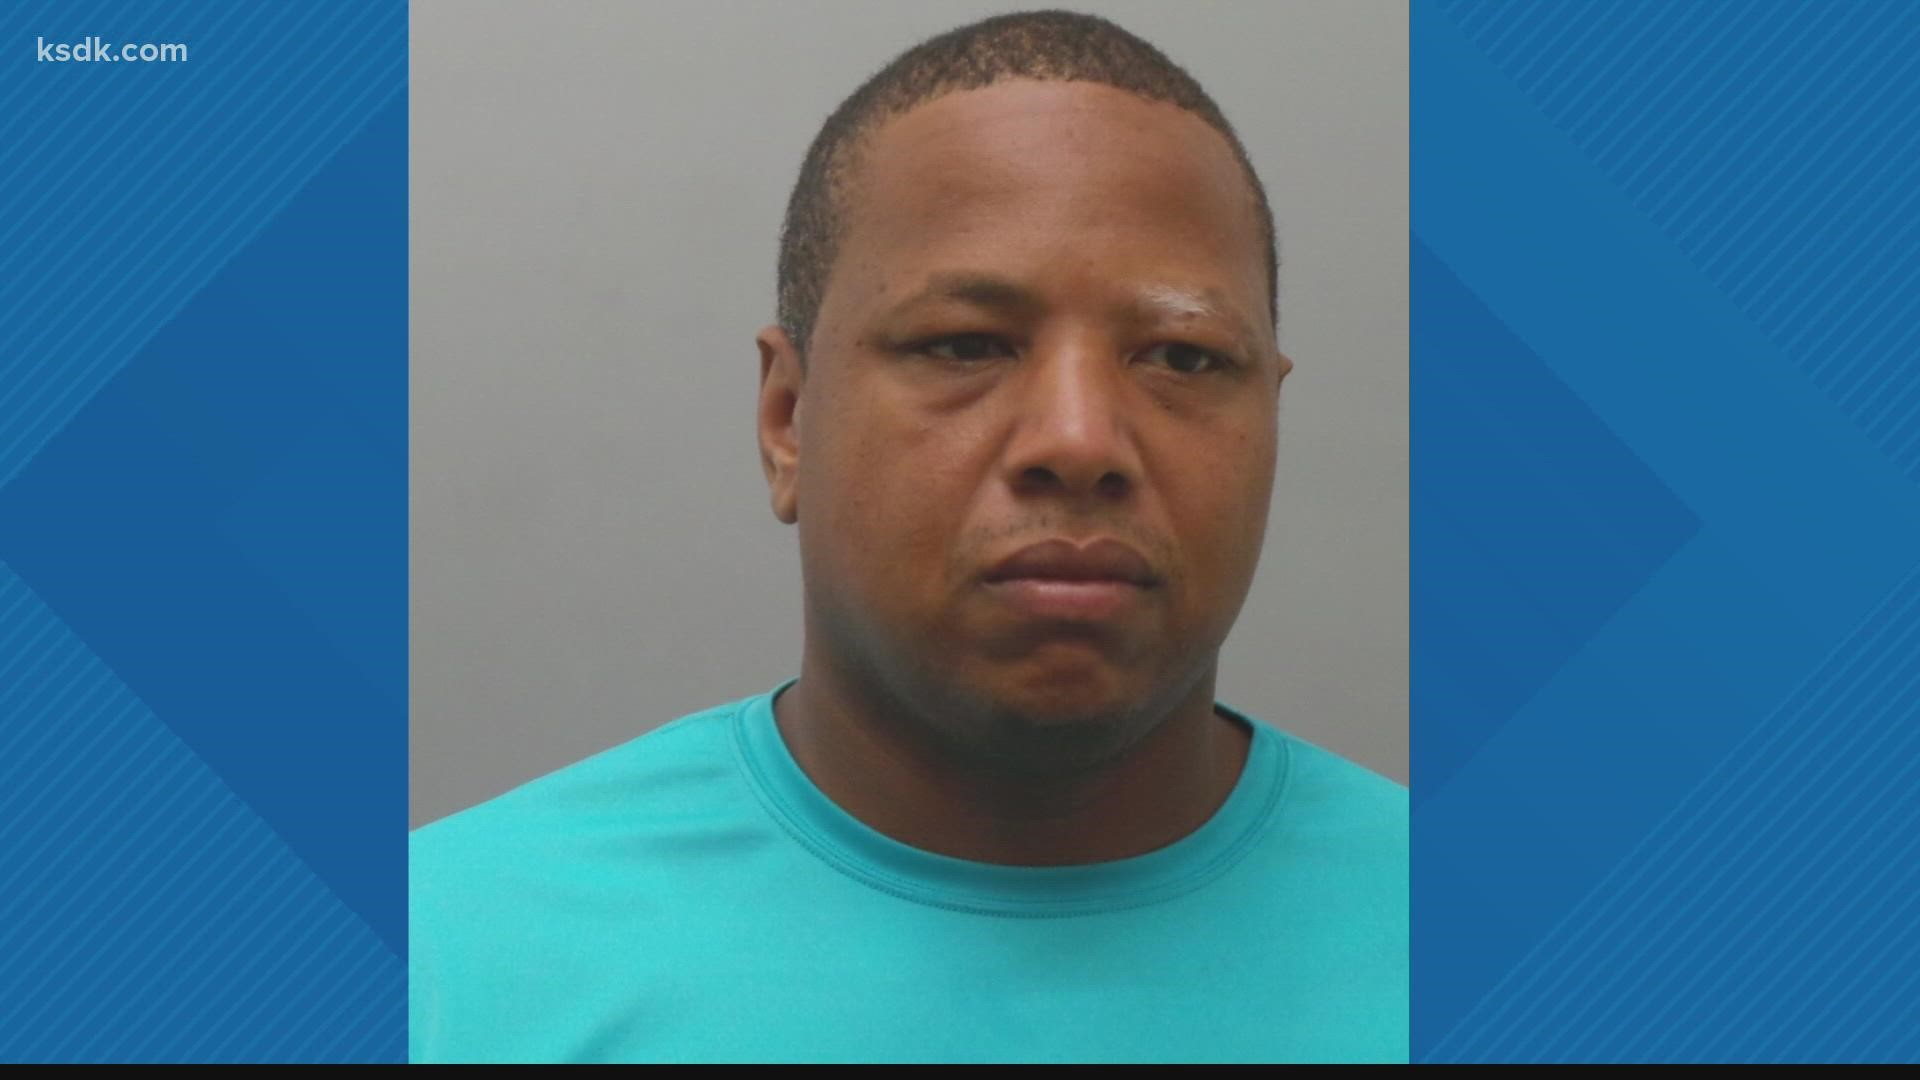 Jenkins is accused of misconduct with several students while employed as a guidance counselor at Hancock High School